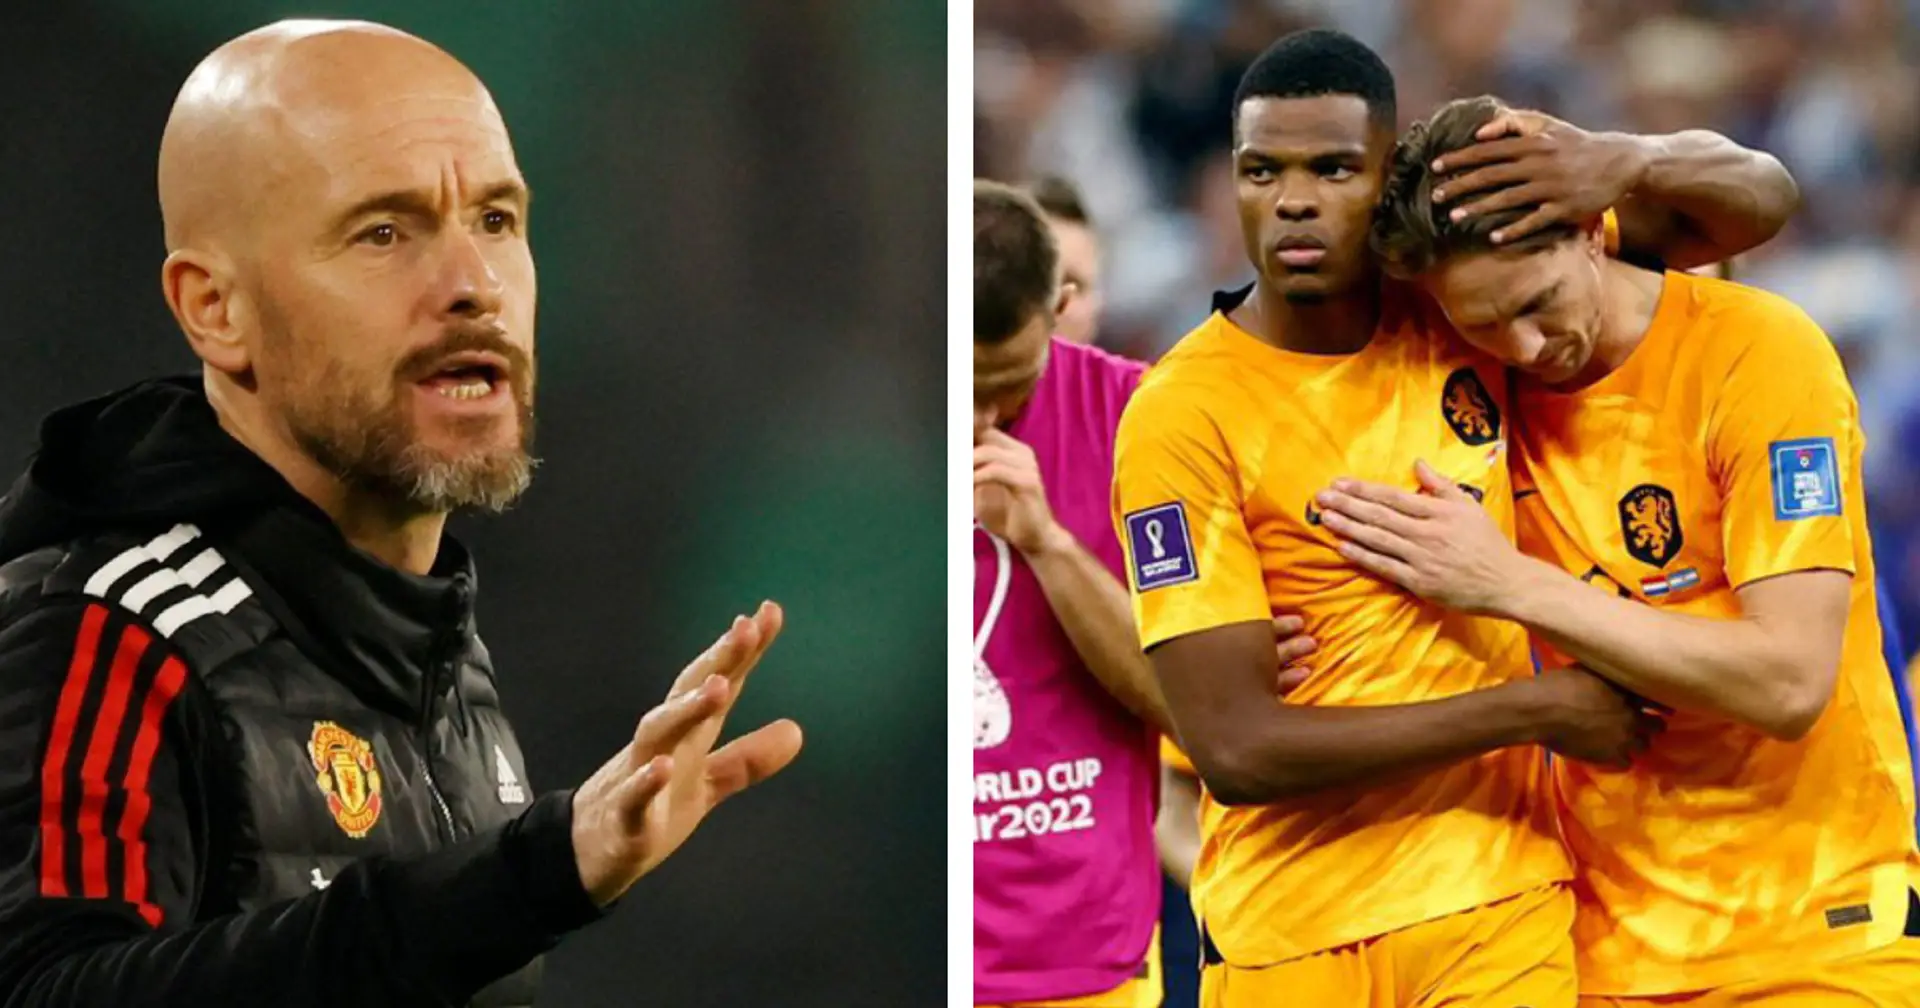 Ten Hag 'pushing' to sign World Cup star for Man United, 2 more options named (reliability: 4 stars)